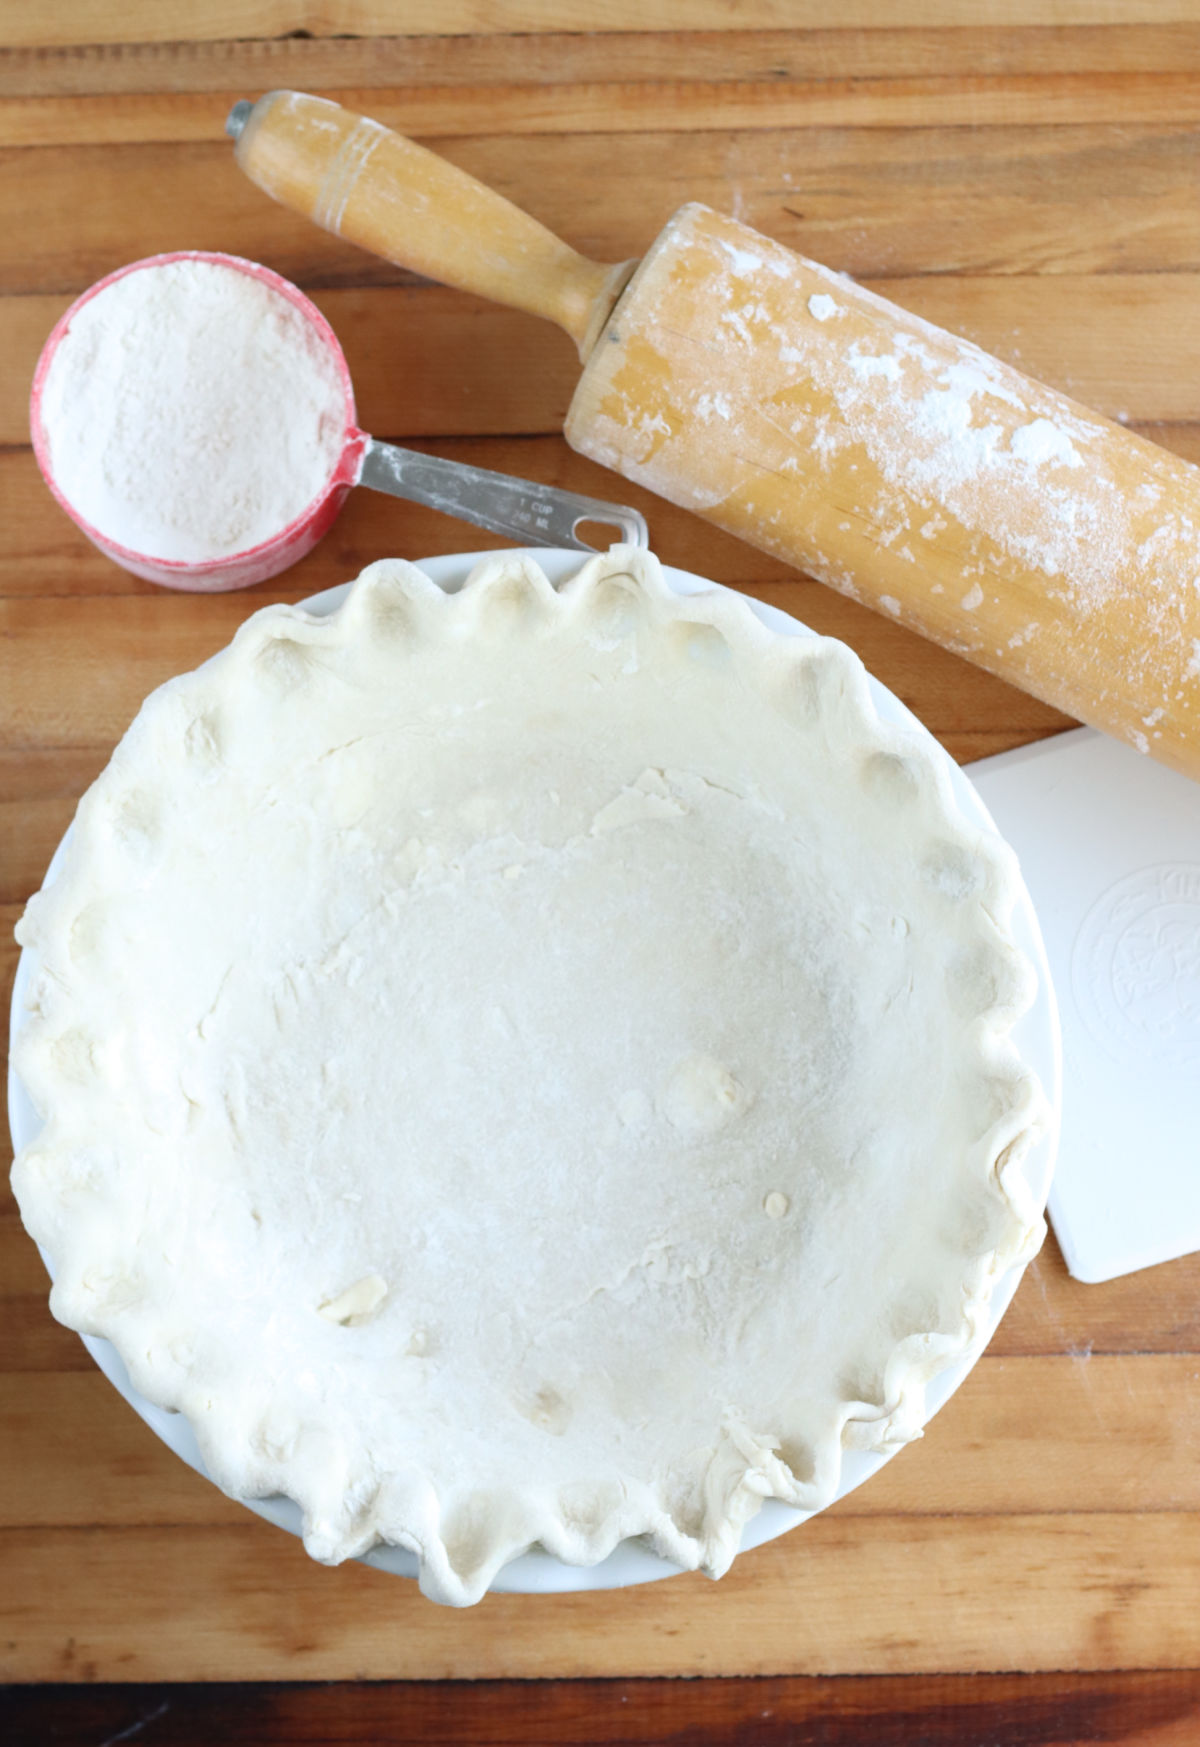 Unbaked pie crust in white pie dish on butcher block, wooden rolling pin, red measuring cup with flour.